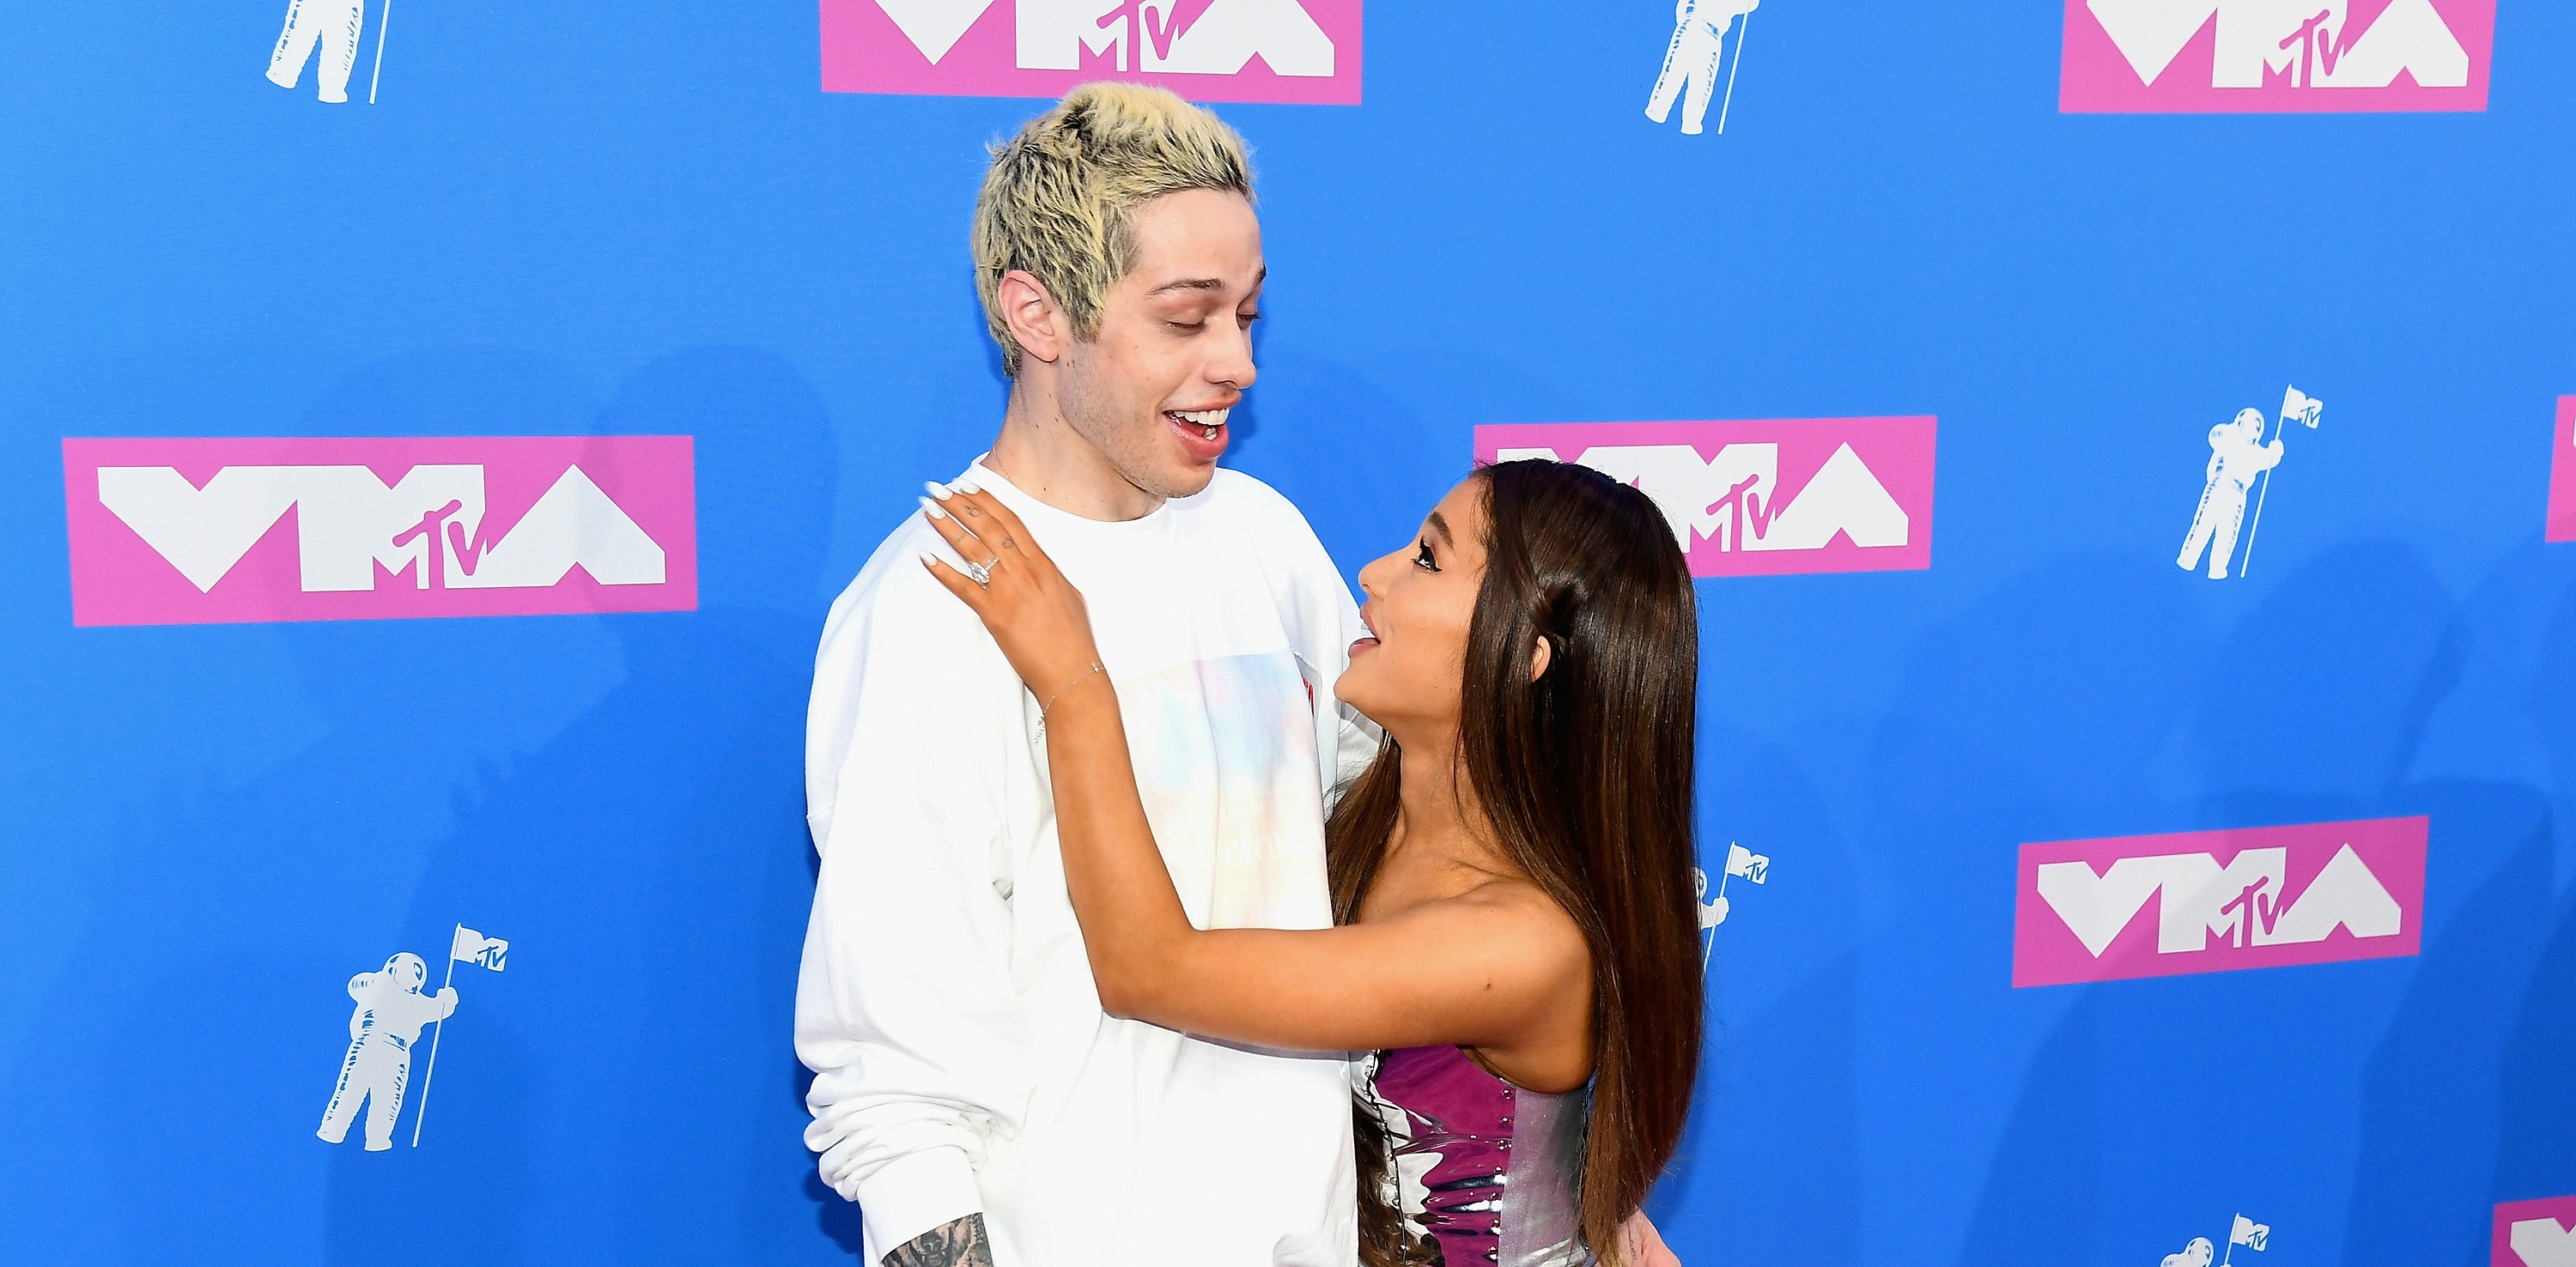 The Pete Davidson References In 7 Rings Show Ariana Grande